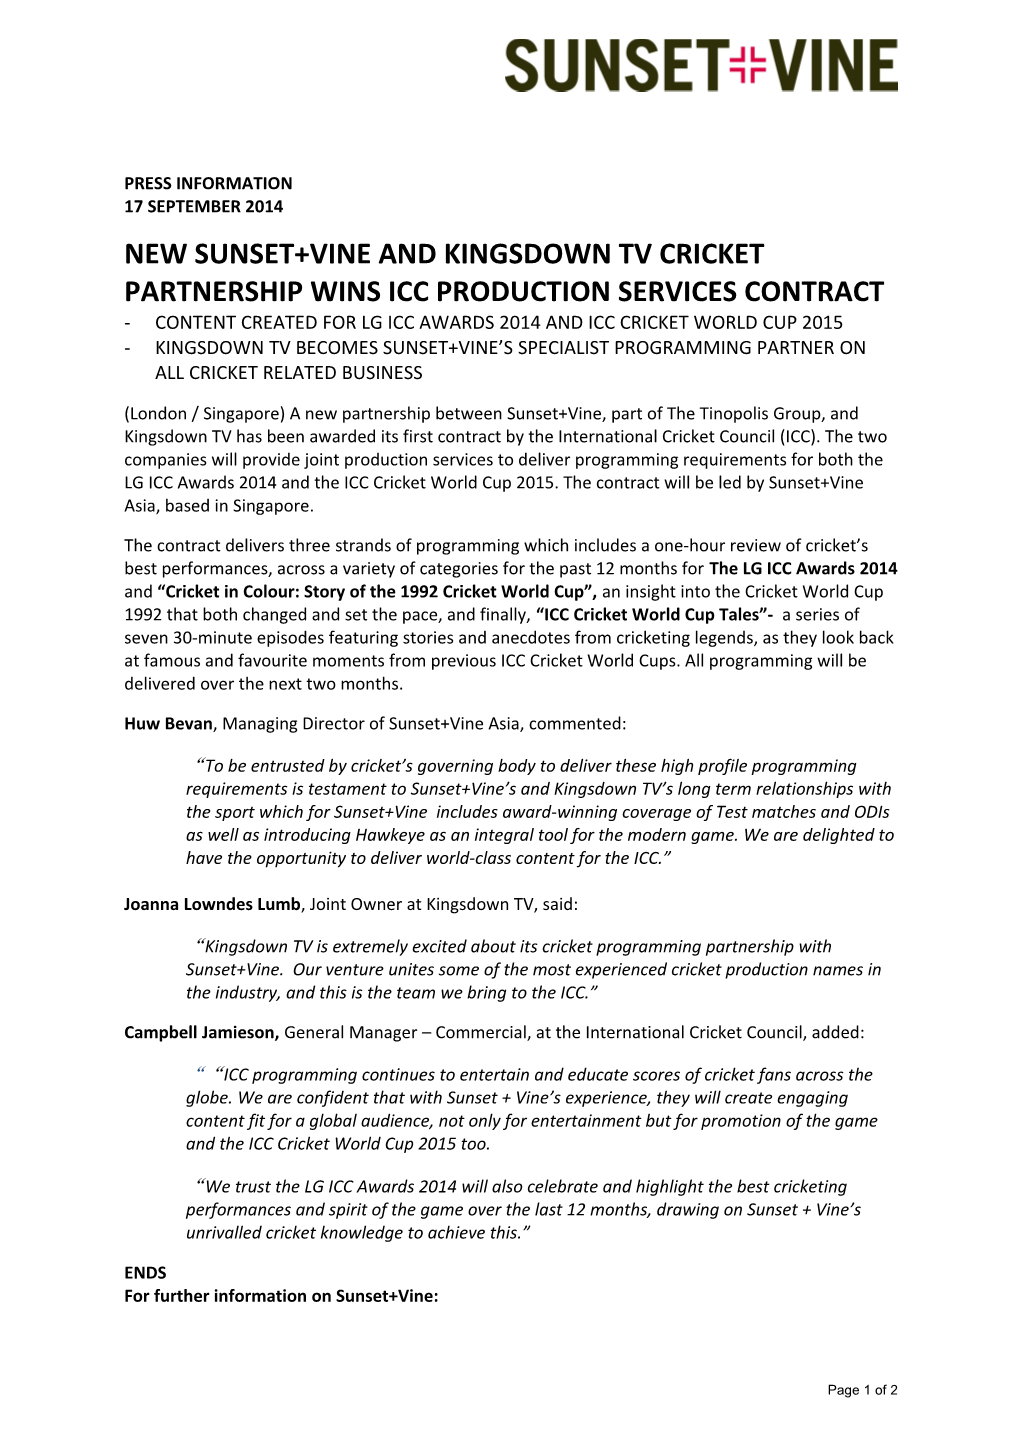 New Sunset+Vine and Kingsdown Tv Cricket Partnership Wins Icc Production Services Contract